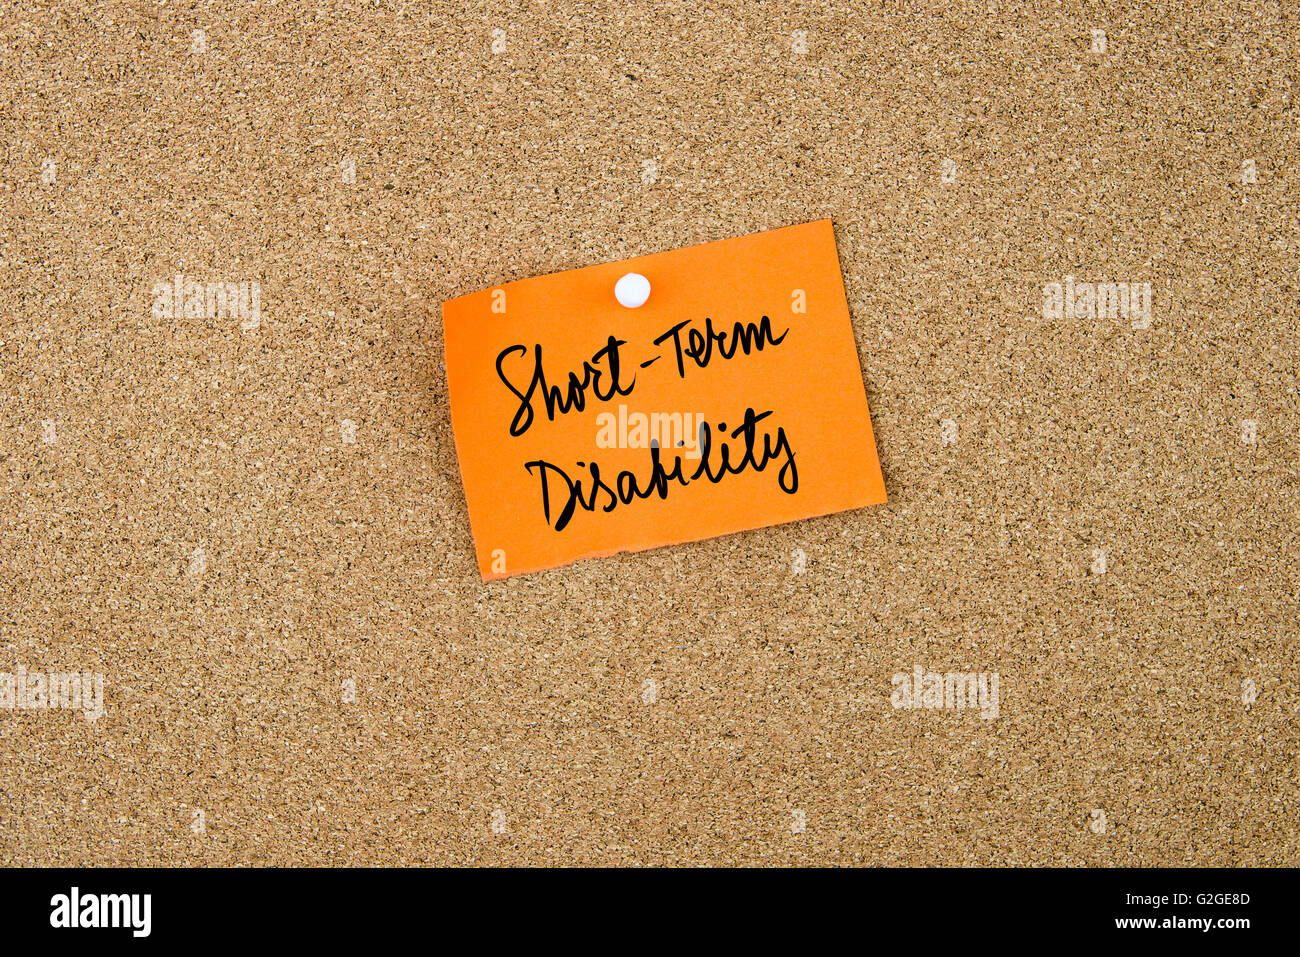 Short Term Disability written on orange paper note pinned on cork board with white thumbtacks, copy space available Stock Photo